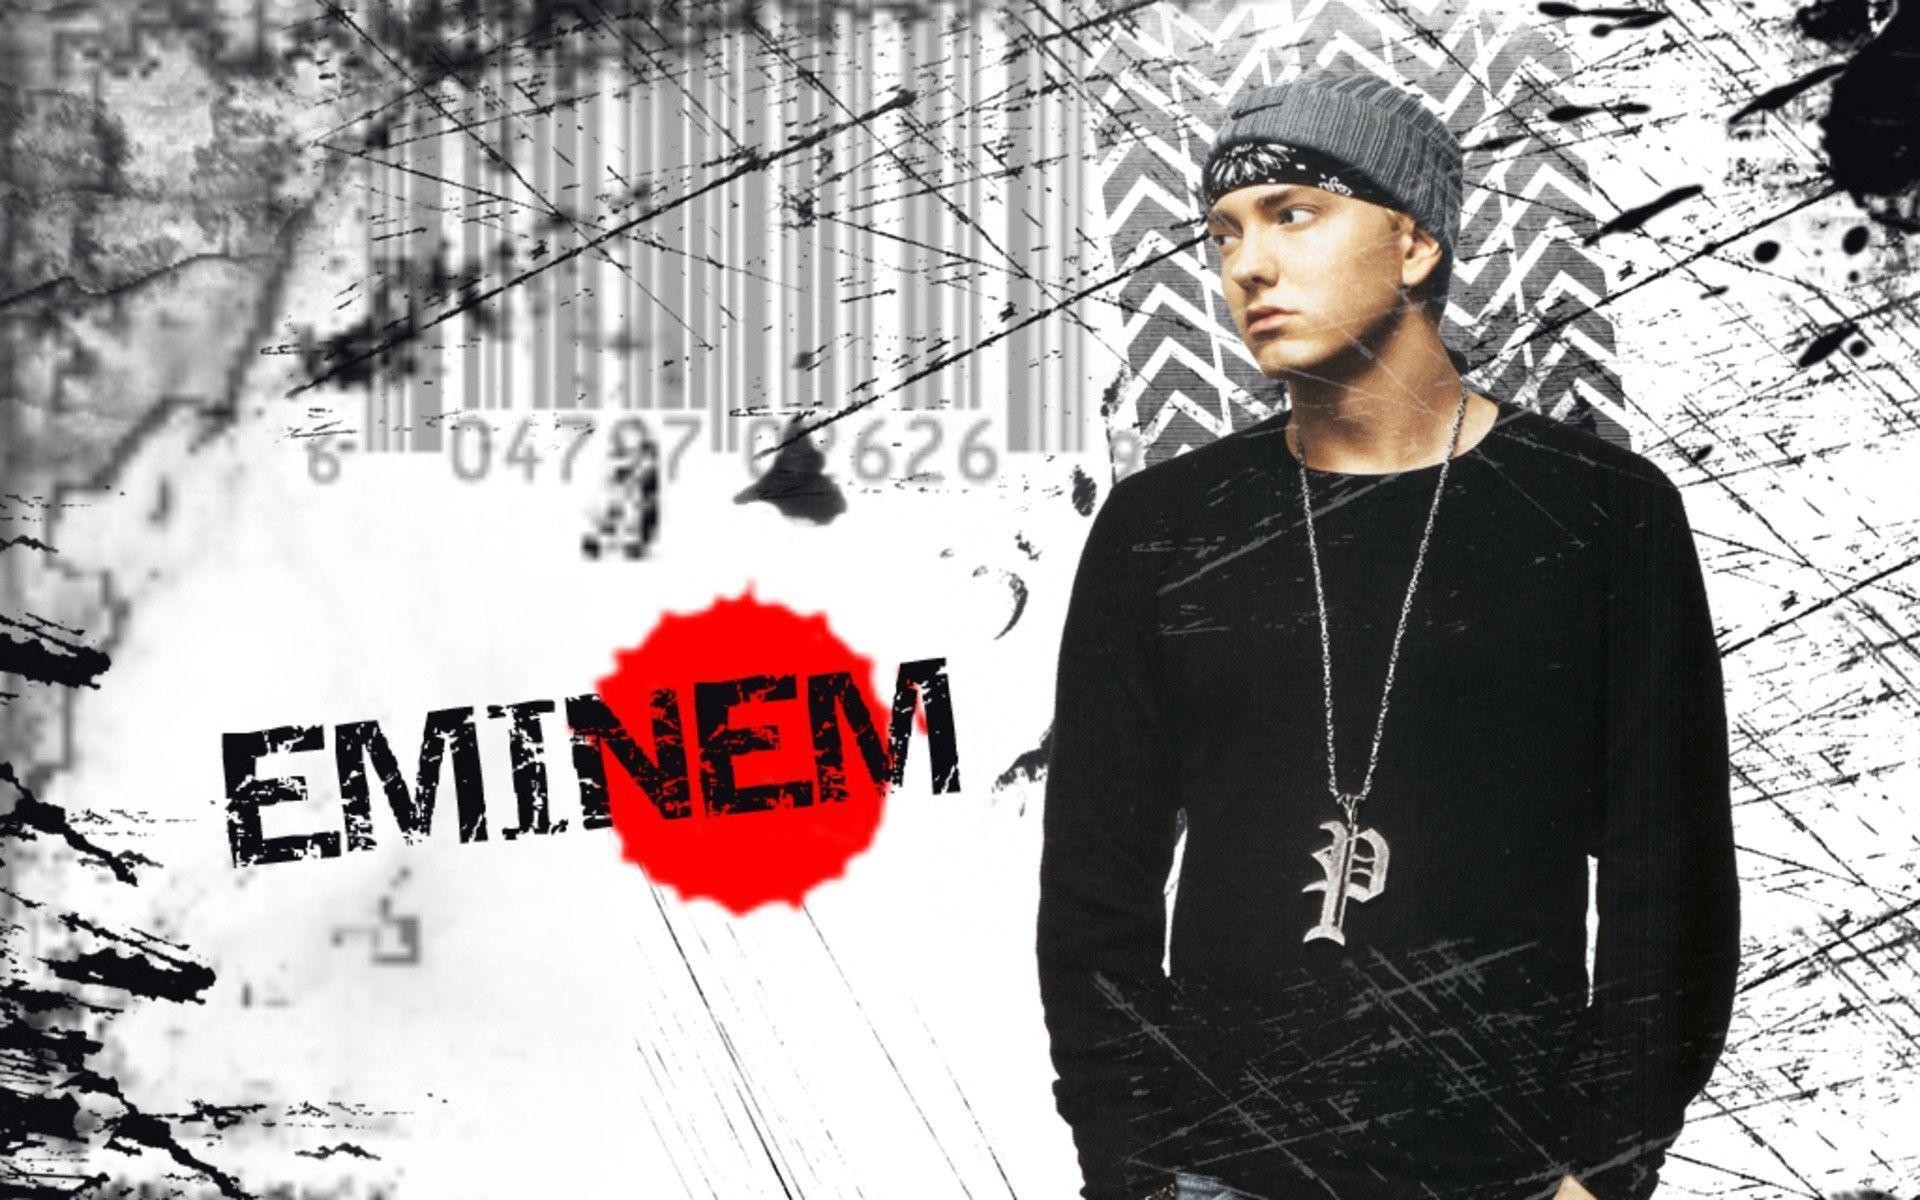 Eminem 2018 Wallpaper Recovery (75+ images)1920 x 1200